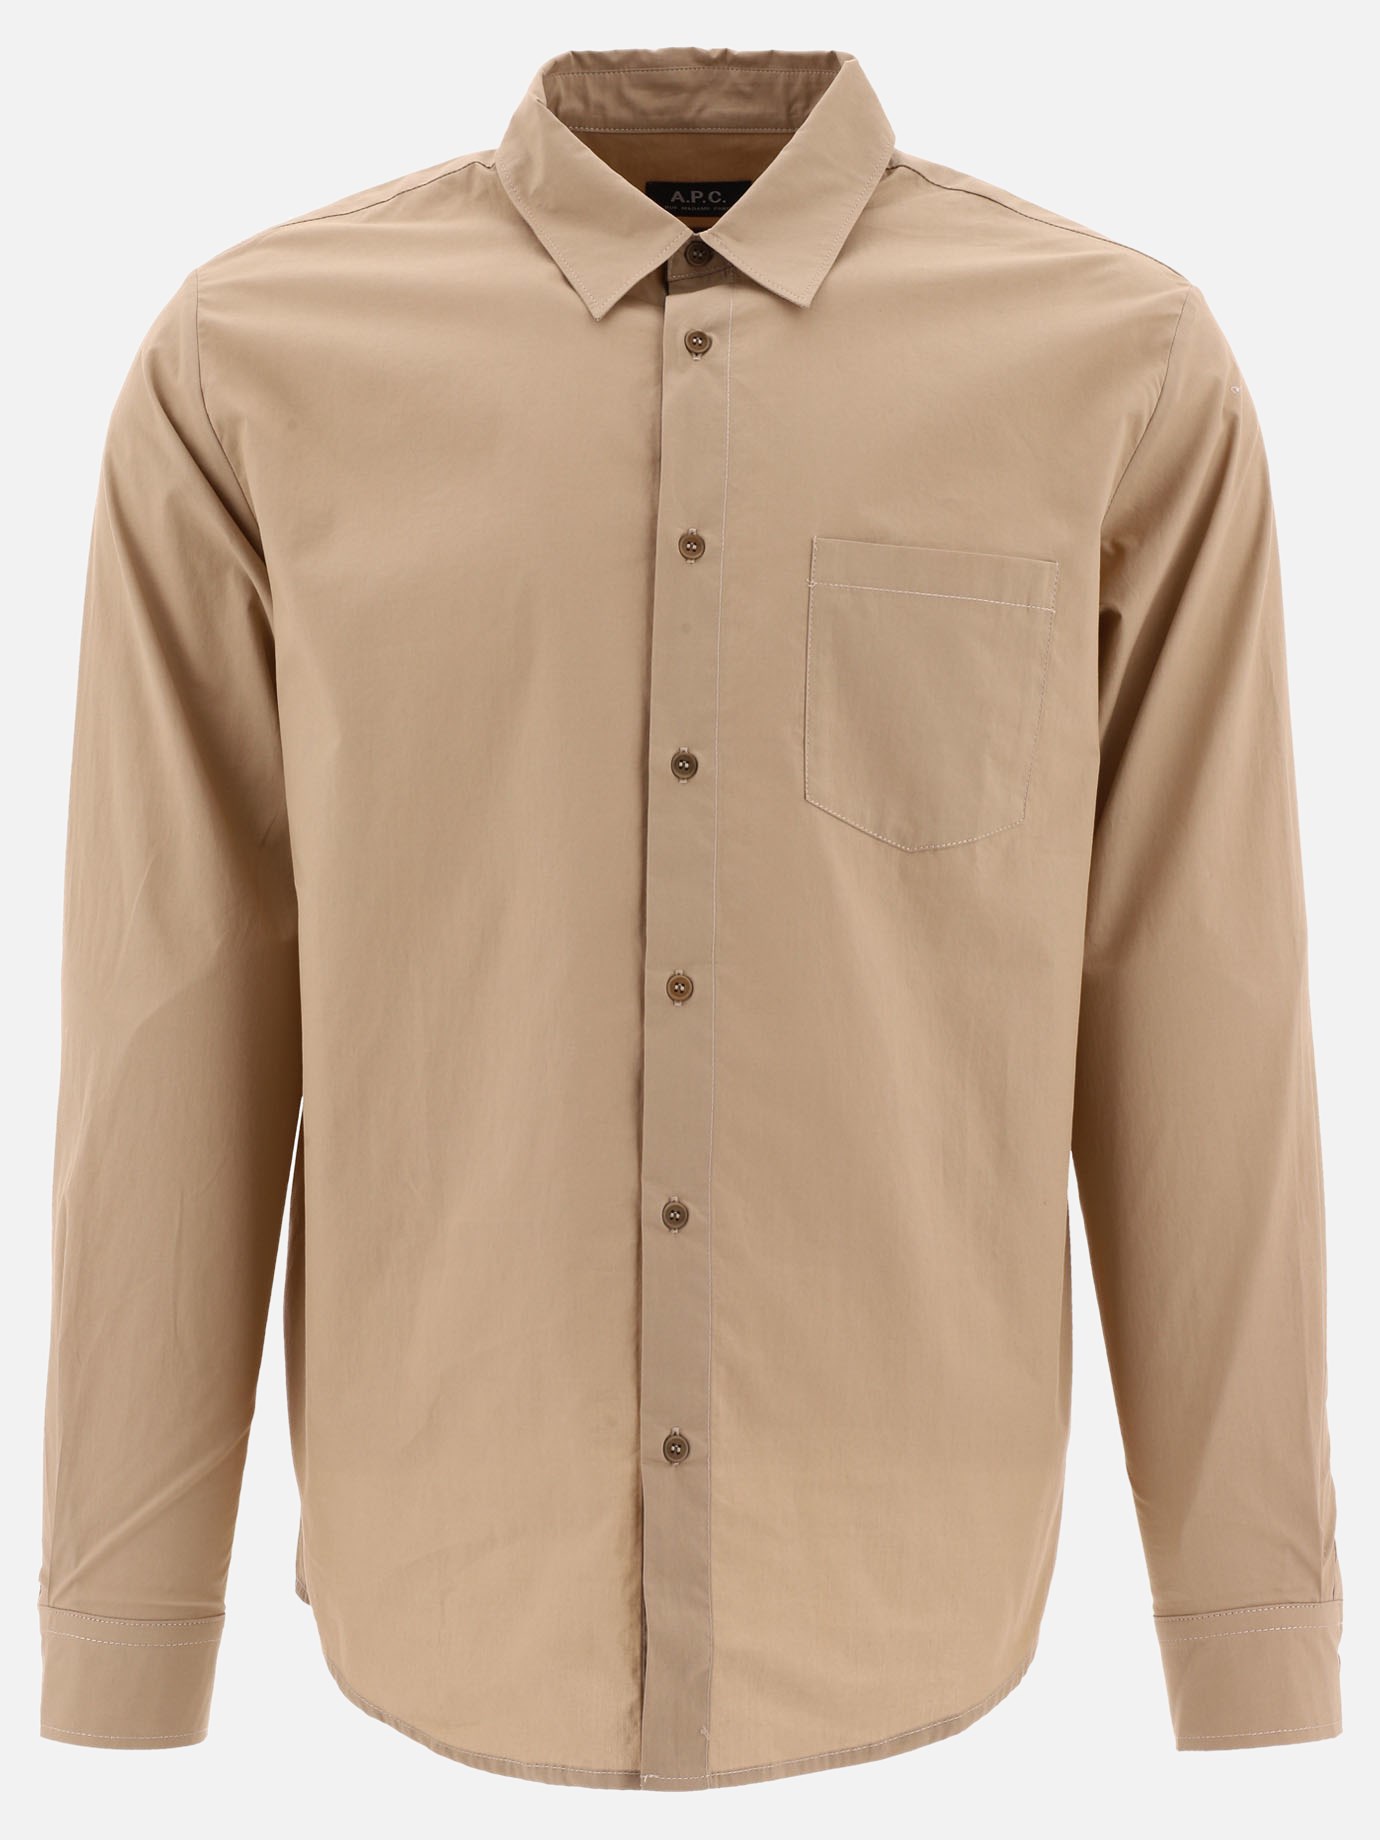  Clement  shirtby A.P.C. - 0